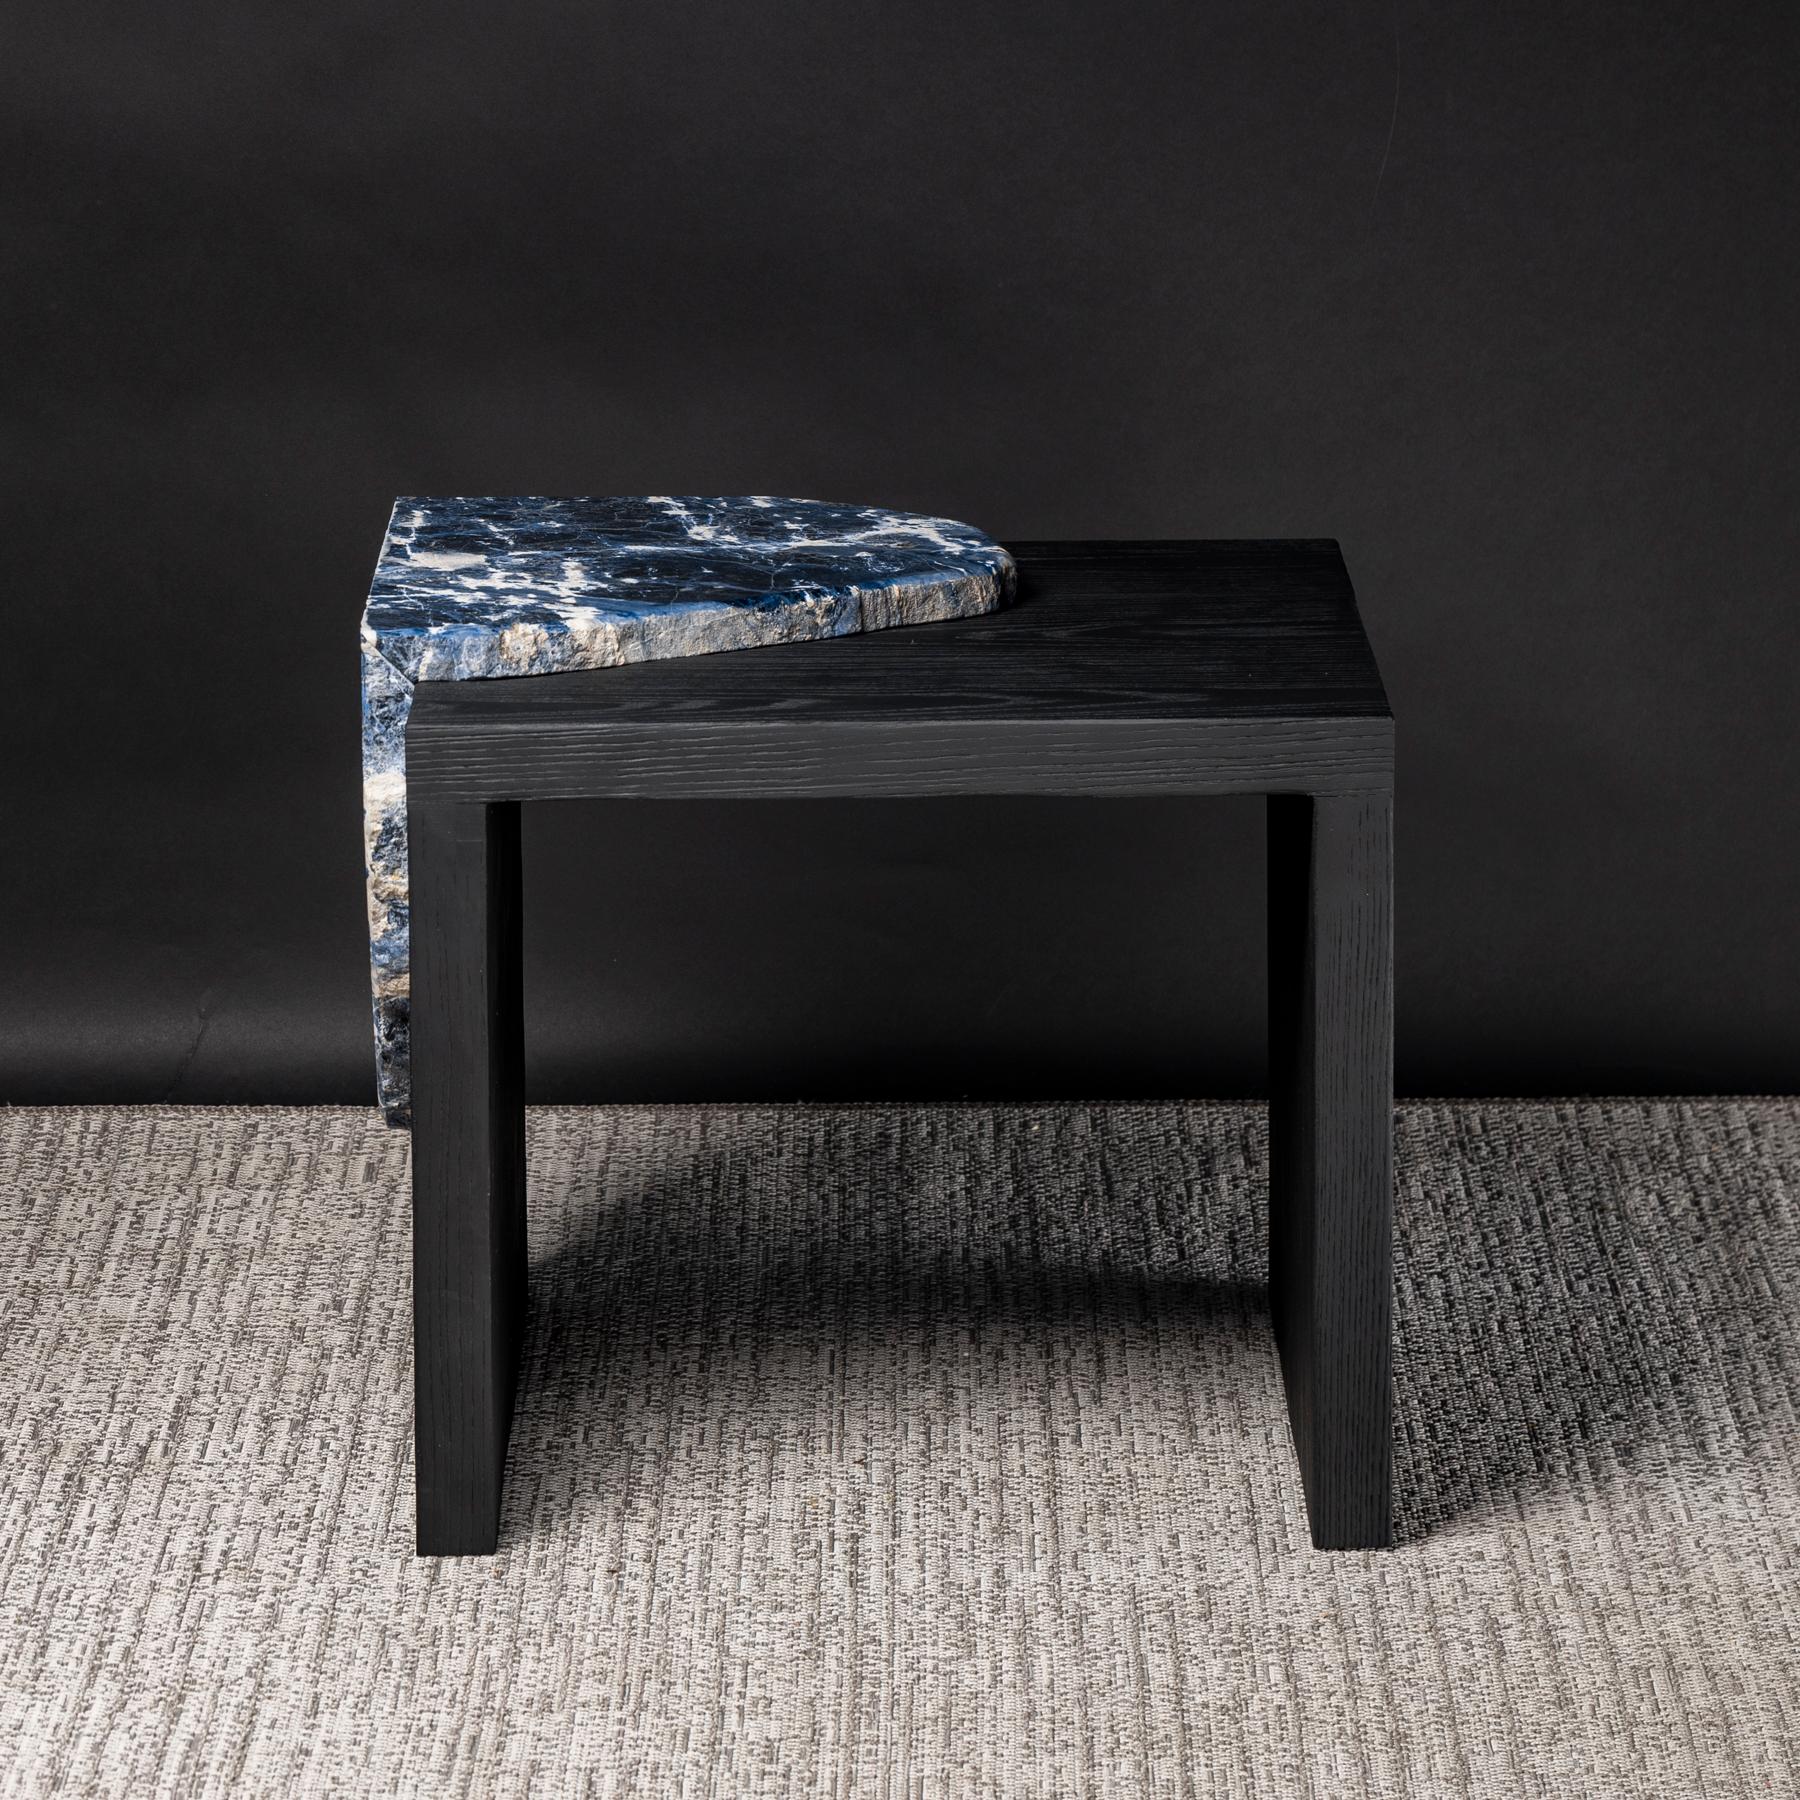 Side table with American solid ash wood grey color with a laser cut Brazilian Sodalite slab on top.

Back to normal collection

This collection features American ash wood, as a simulation of human development (buildings, cities, etc); with the